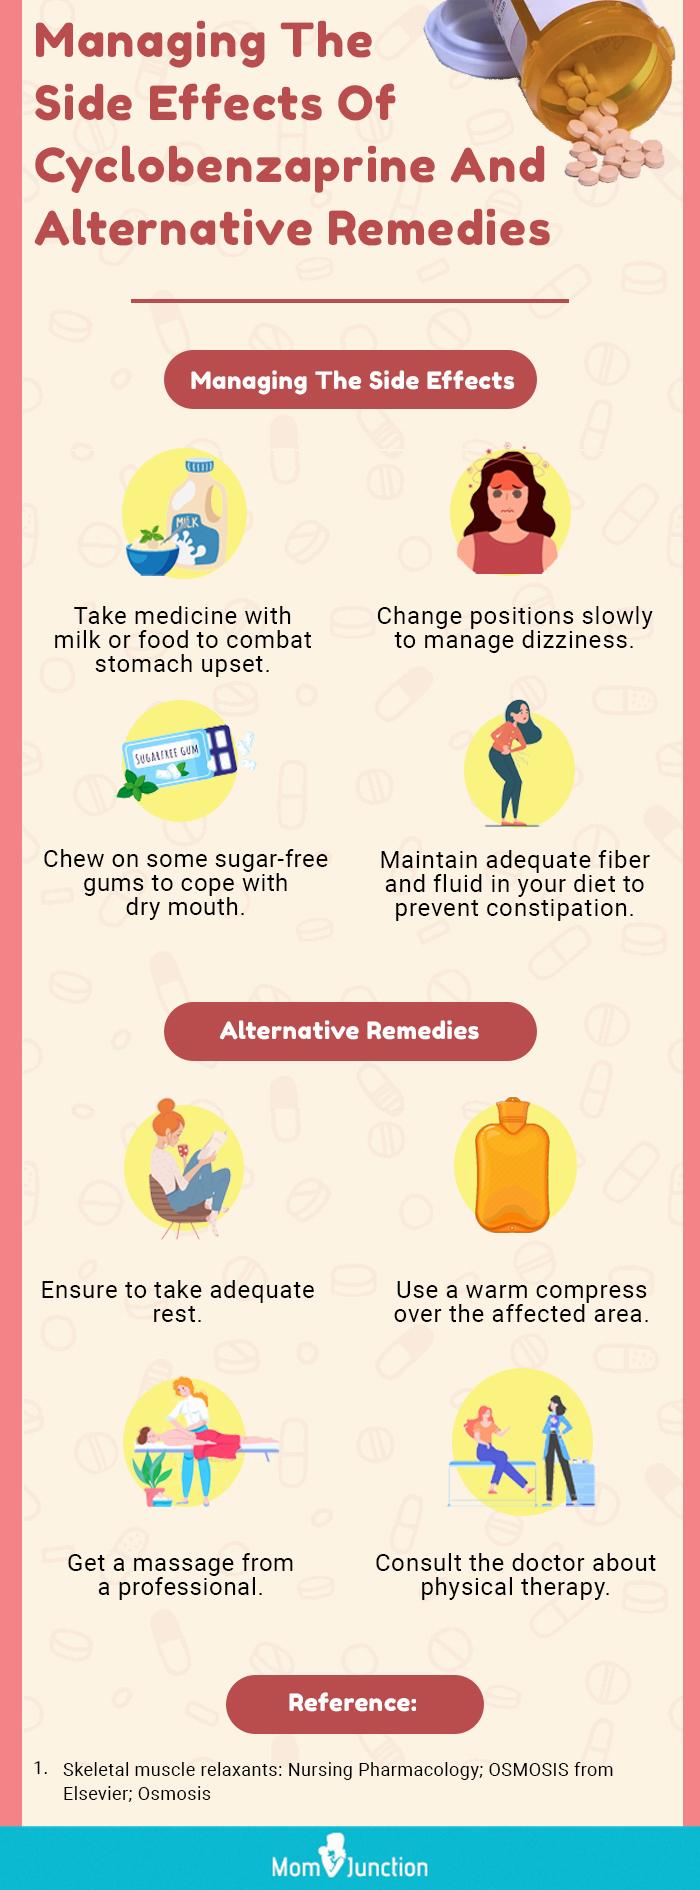 This image provides tips for managing side effects of cyclobenzaprine and alternative remedies.